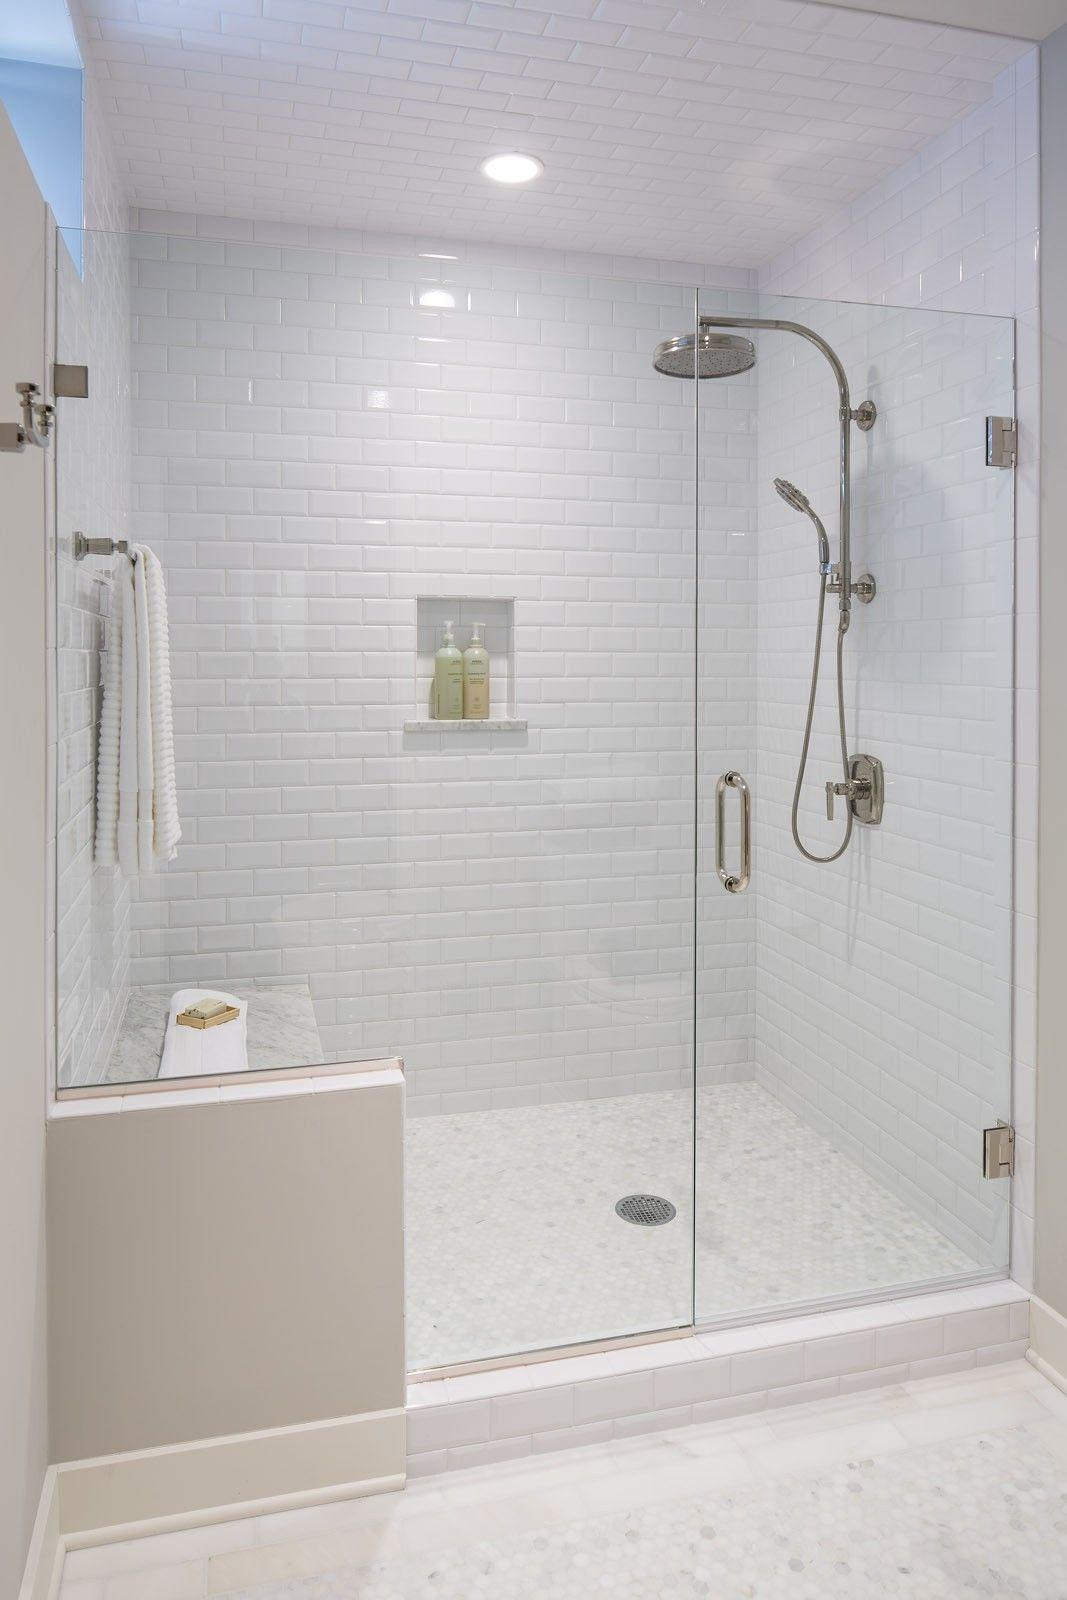 White Tile Bathroom Shower
 All white bathroom with subway tile even on the ceiling